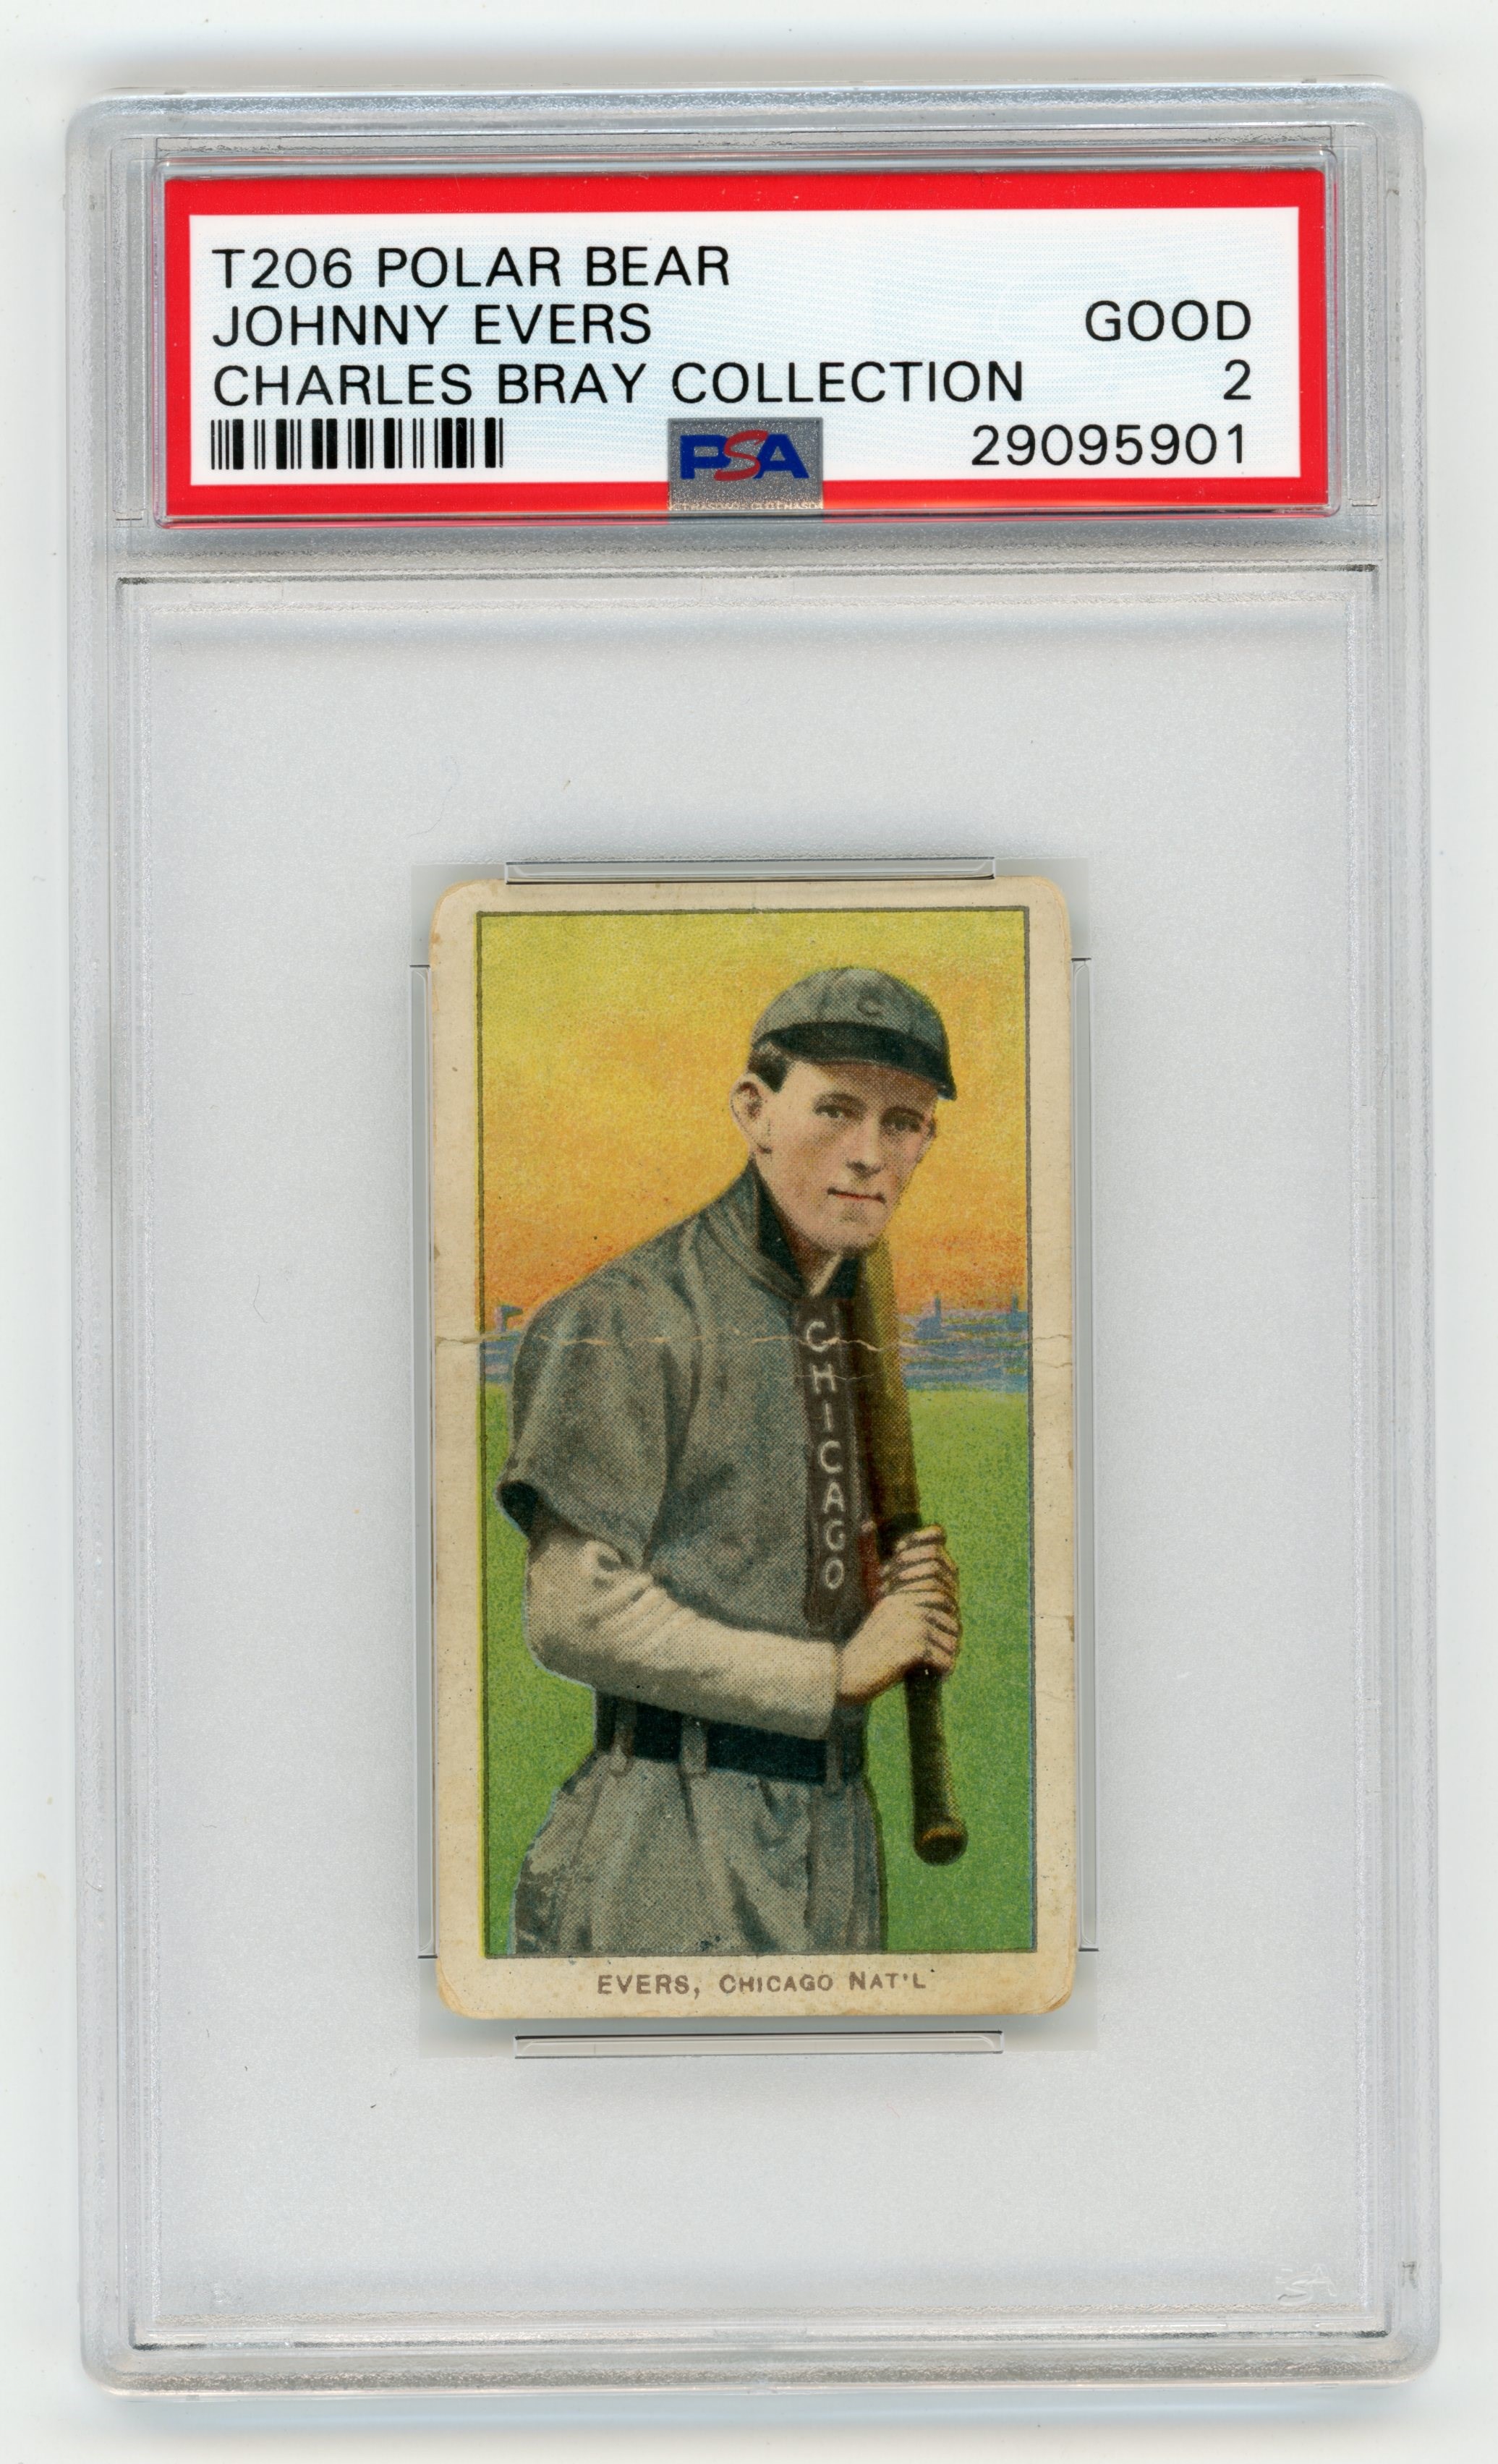 T206 Polar Bear Johnny Evers PSA 2 From Charles Bray Collection